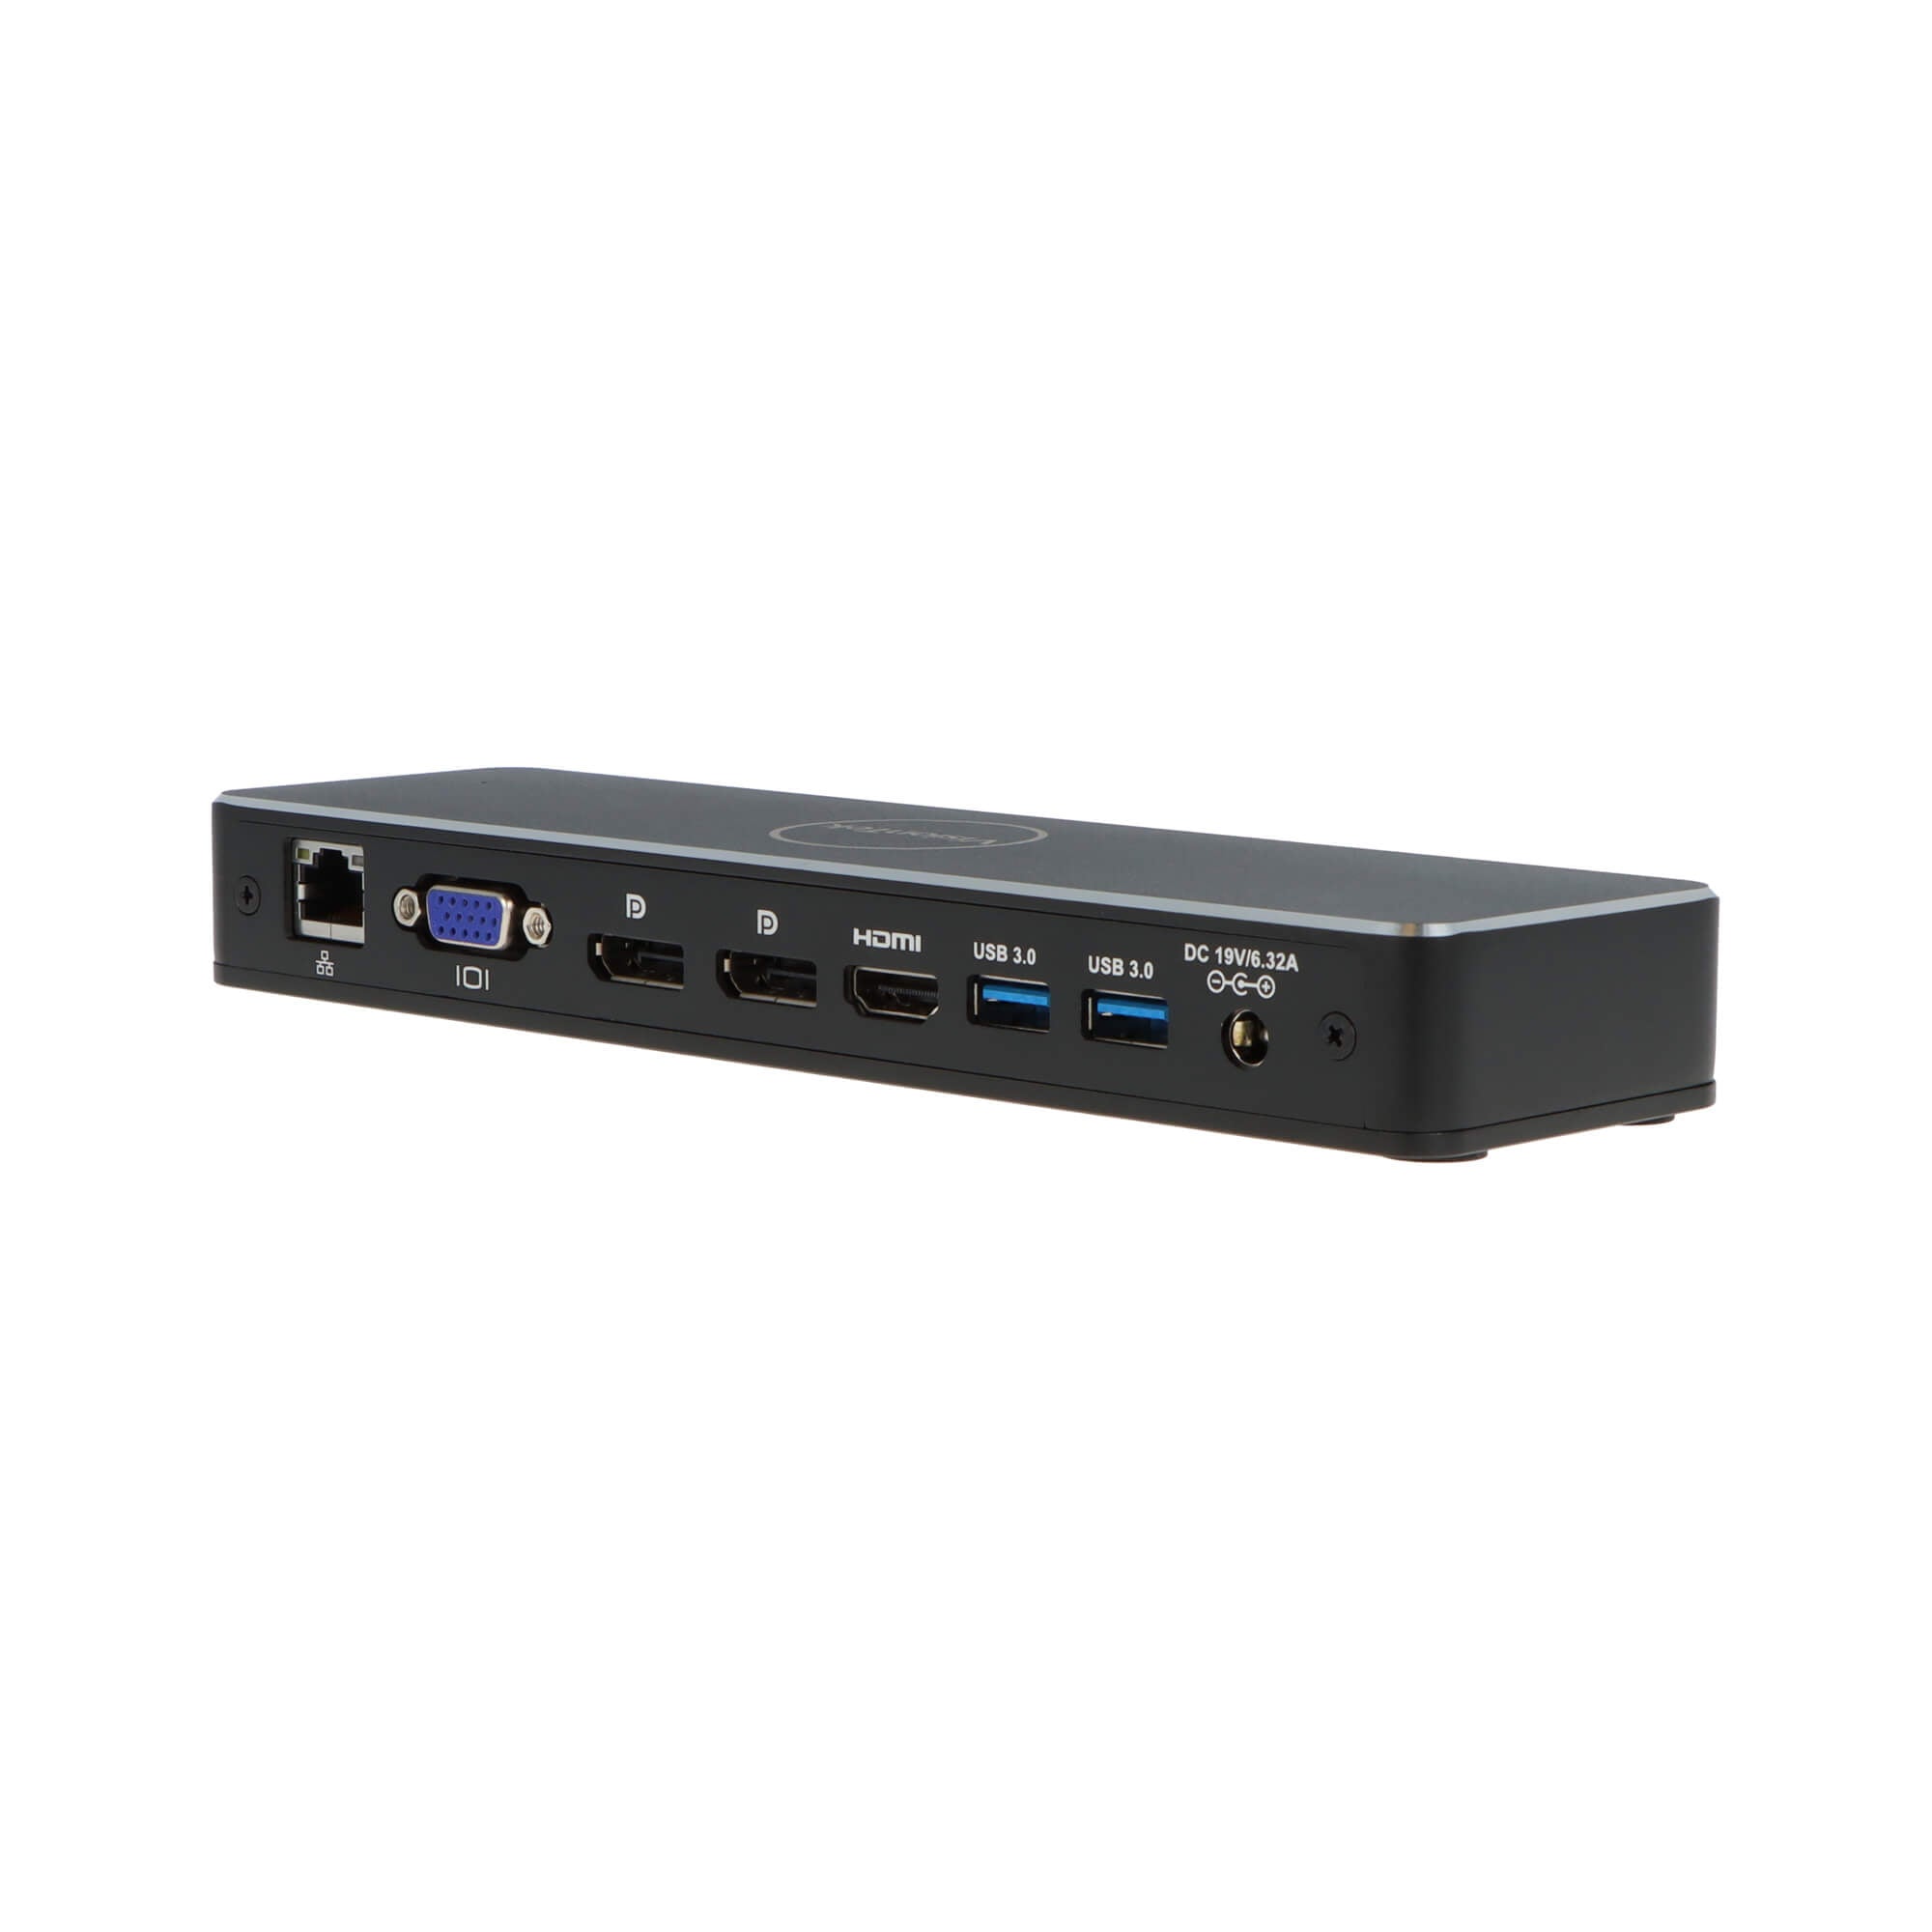 VT5000 Dual Display 4K Thunderbolt 3 Docking Station with 87W Power Delivery